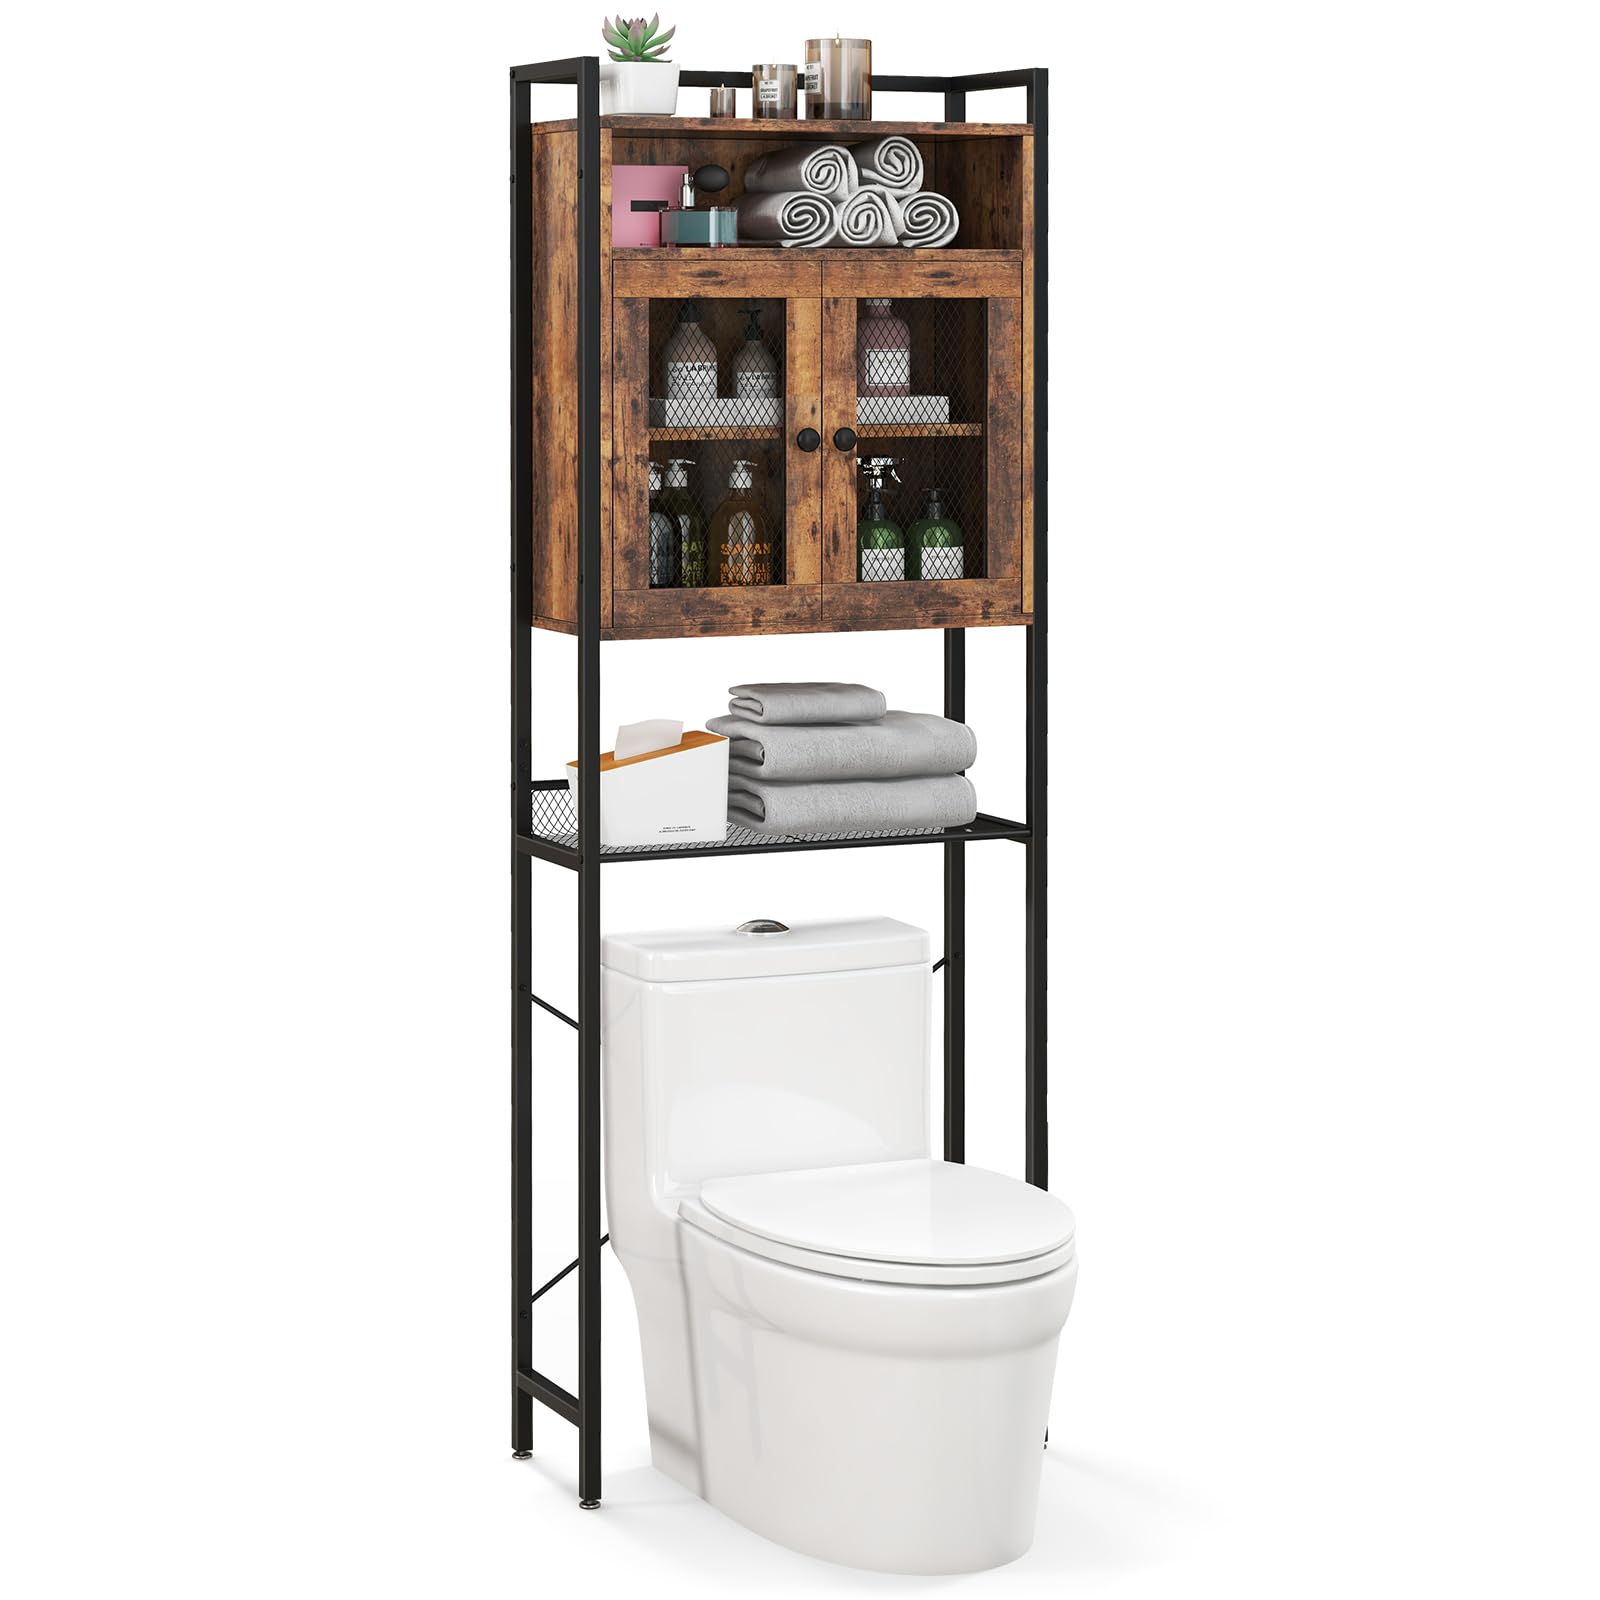 Giantex Over-The-Toilet Storage Cabinet, Bathroom Storage Organizer Above Toilet with Heavy-Duty Metal Frame